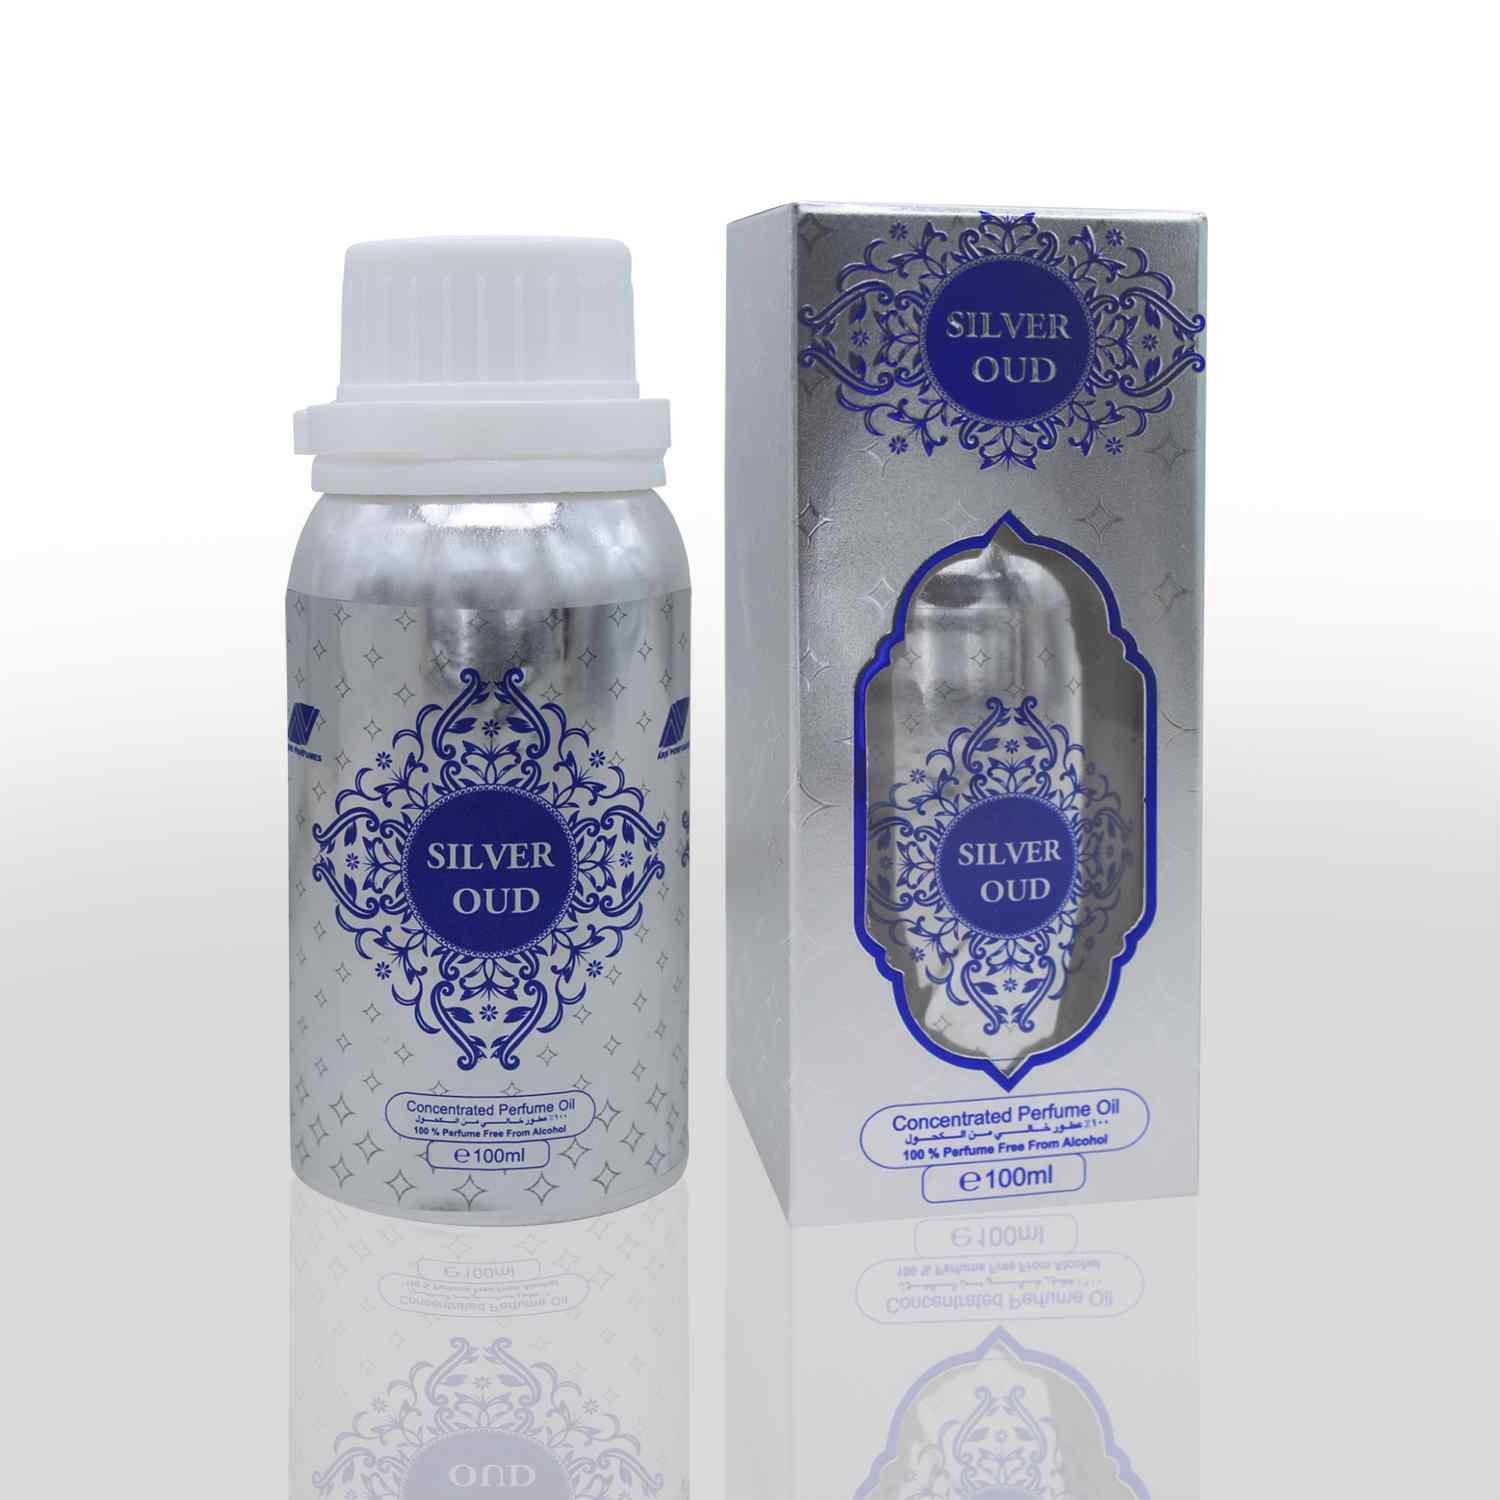 Silver Oud 100ml which is concentrated perfume oil, it is a products of ARD PERFUMES